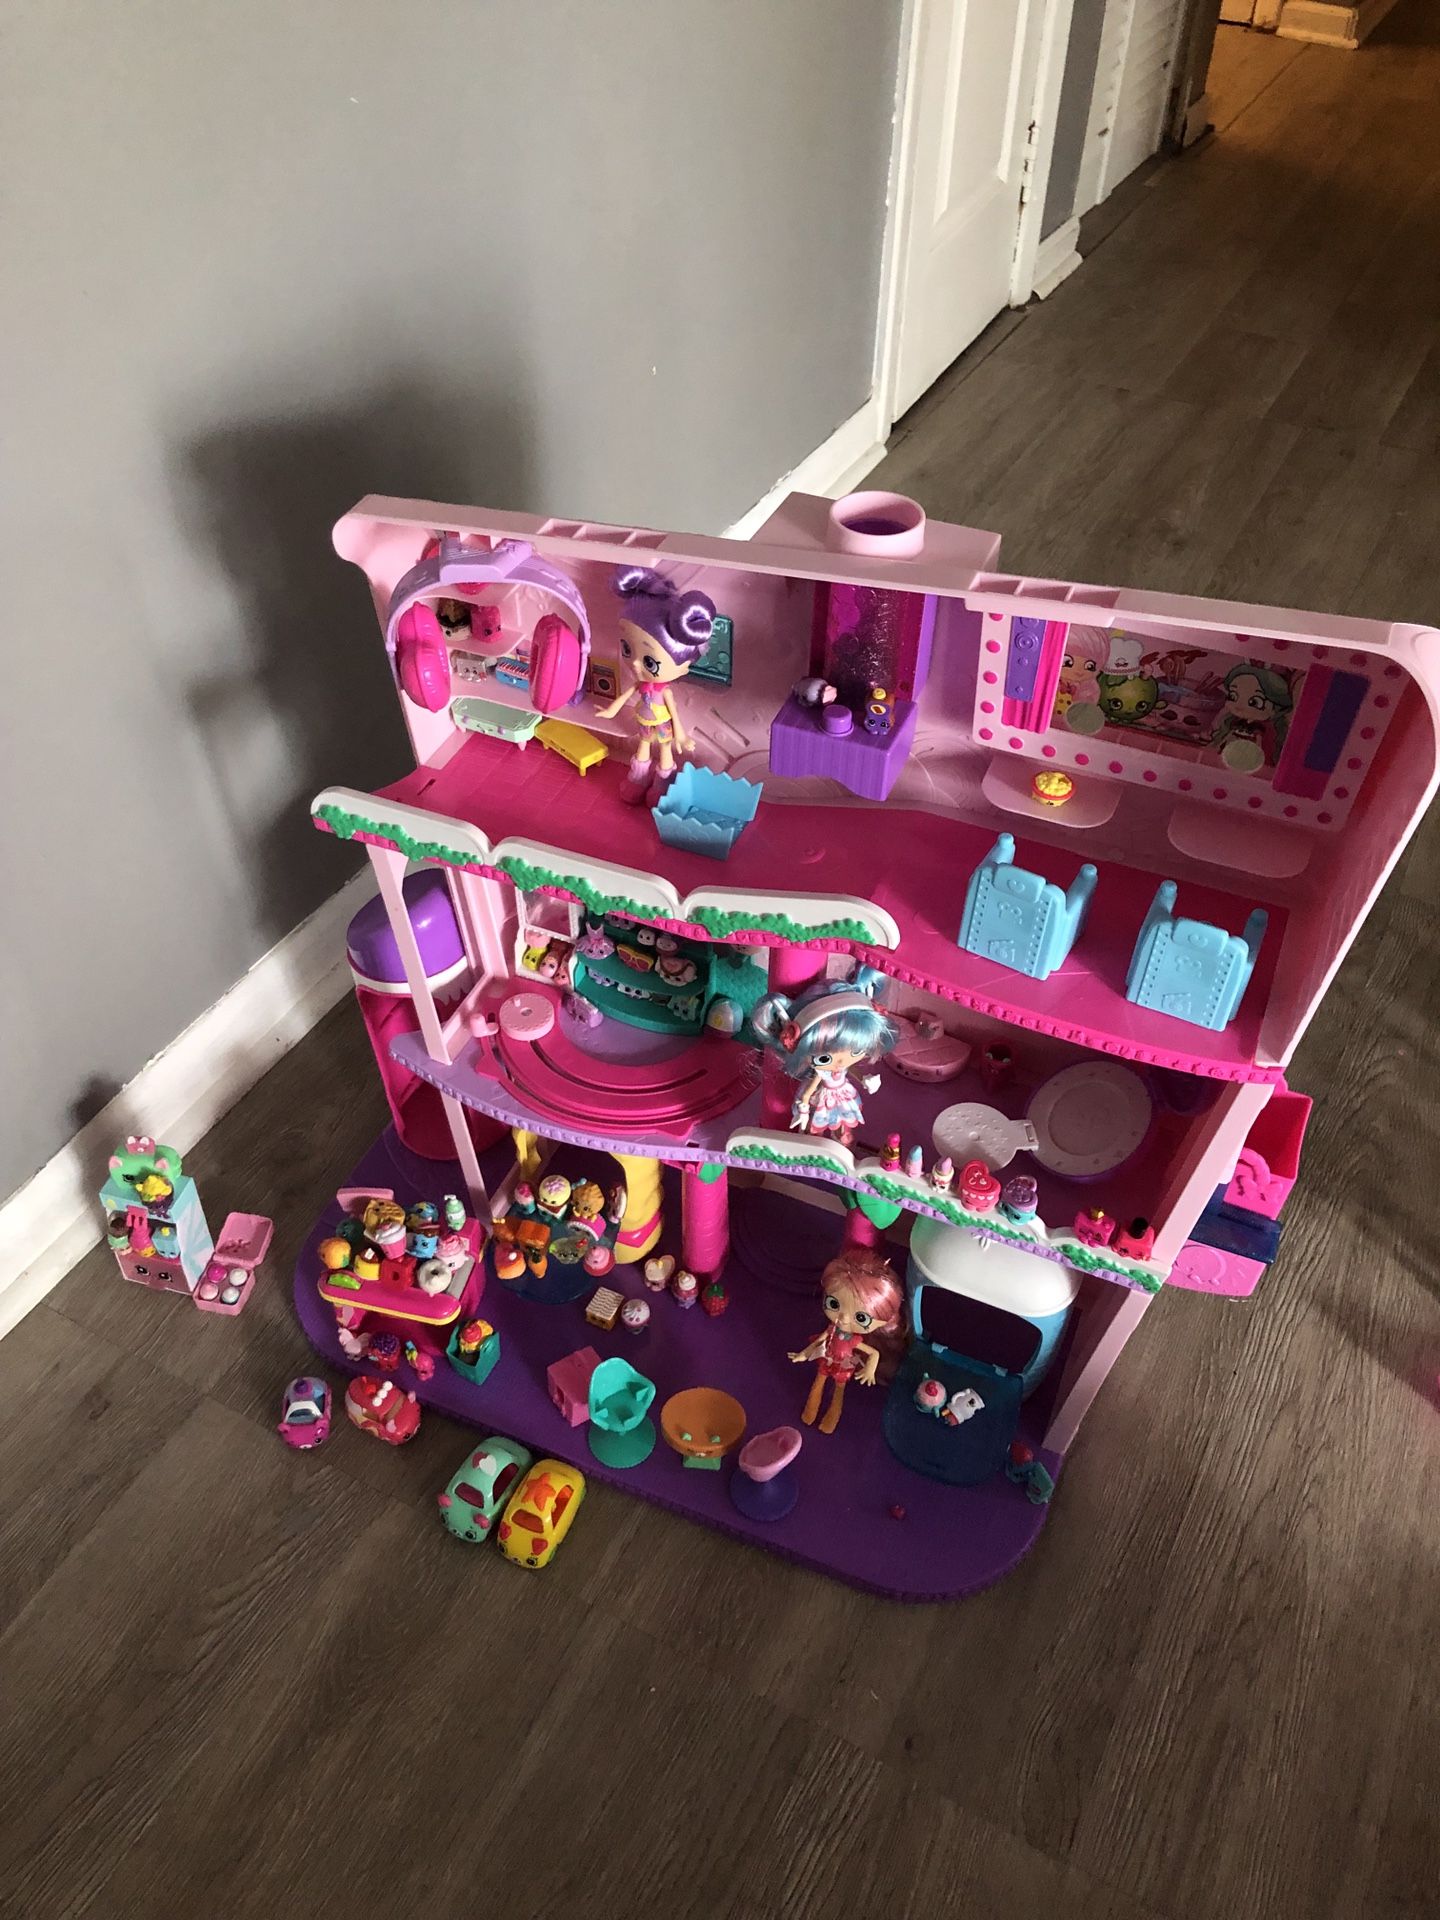 Shopkins Mall with over 100 Shopkins, regular price $119 and doesn’t include extra Shopkins